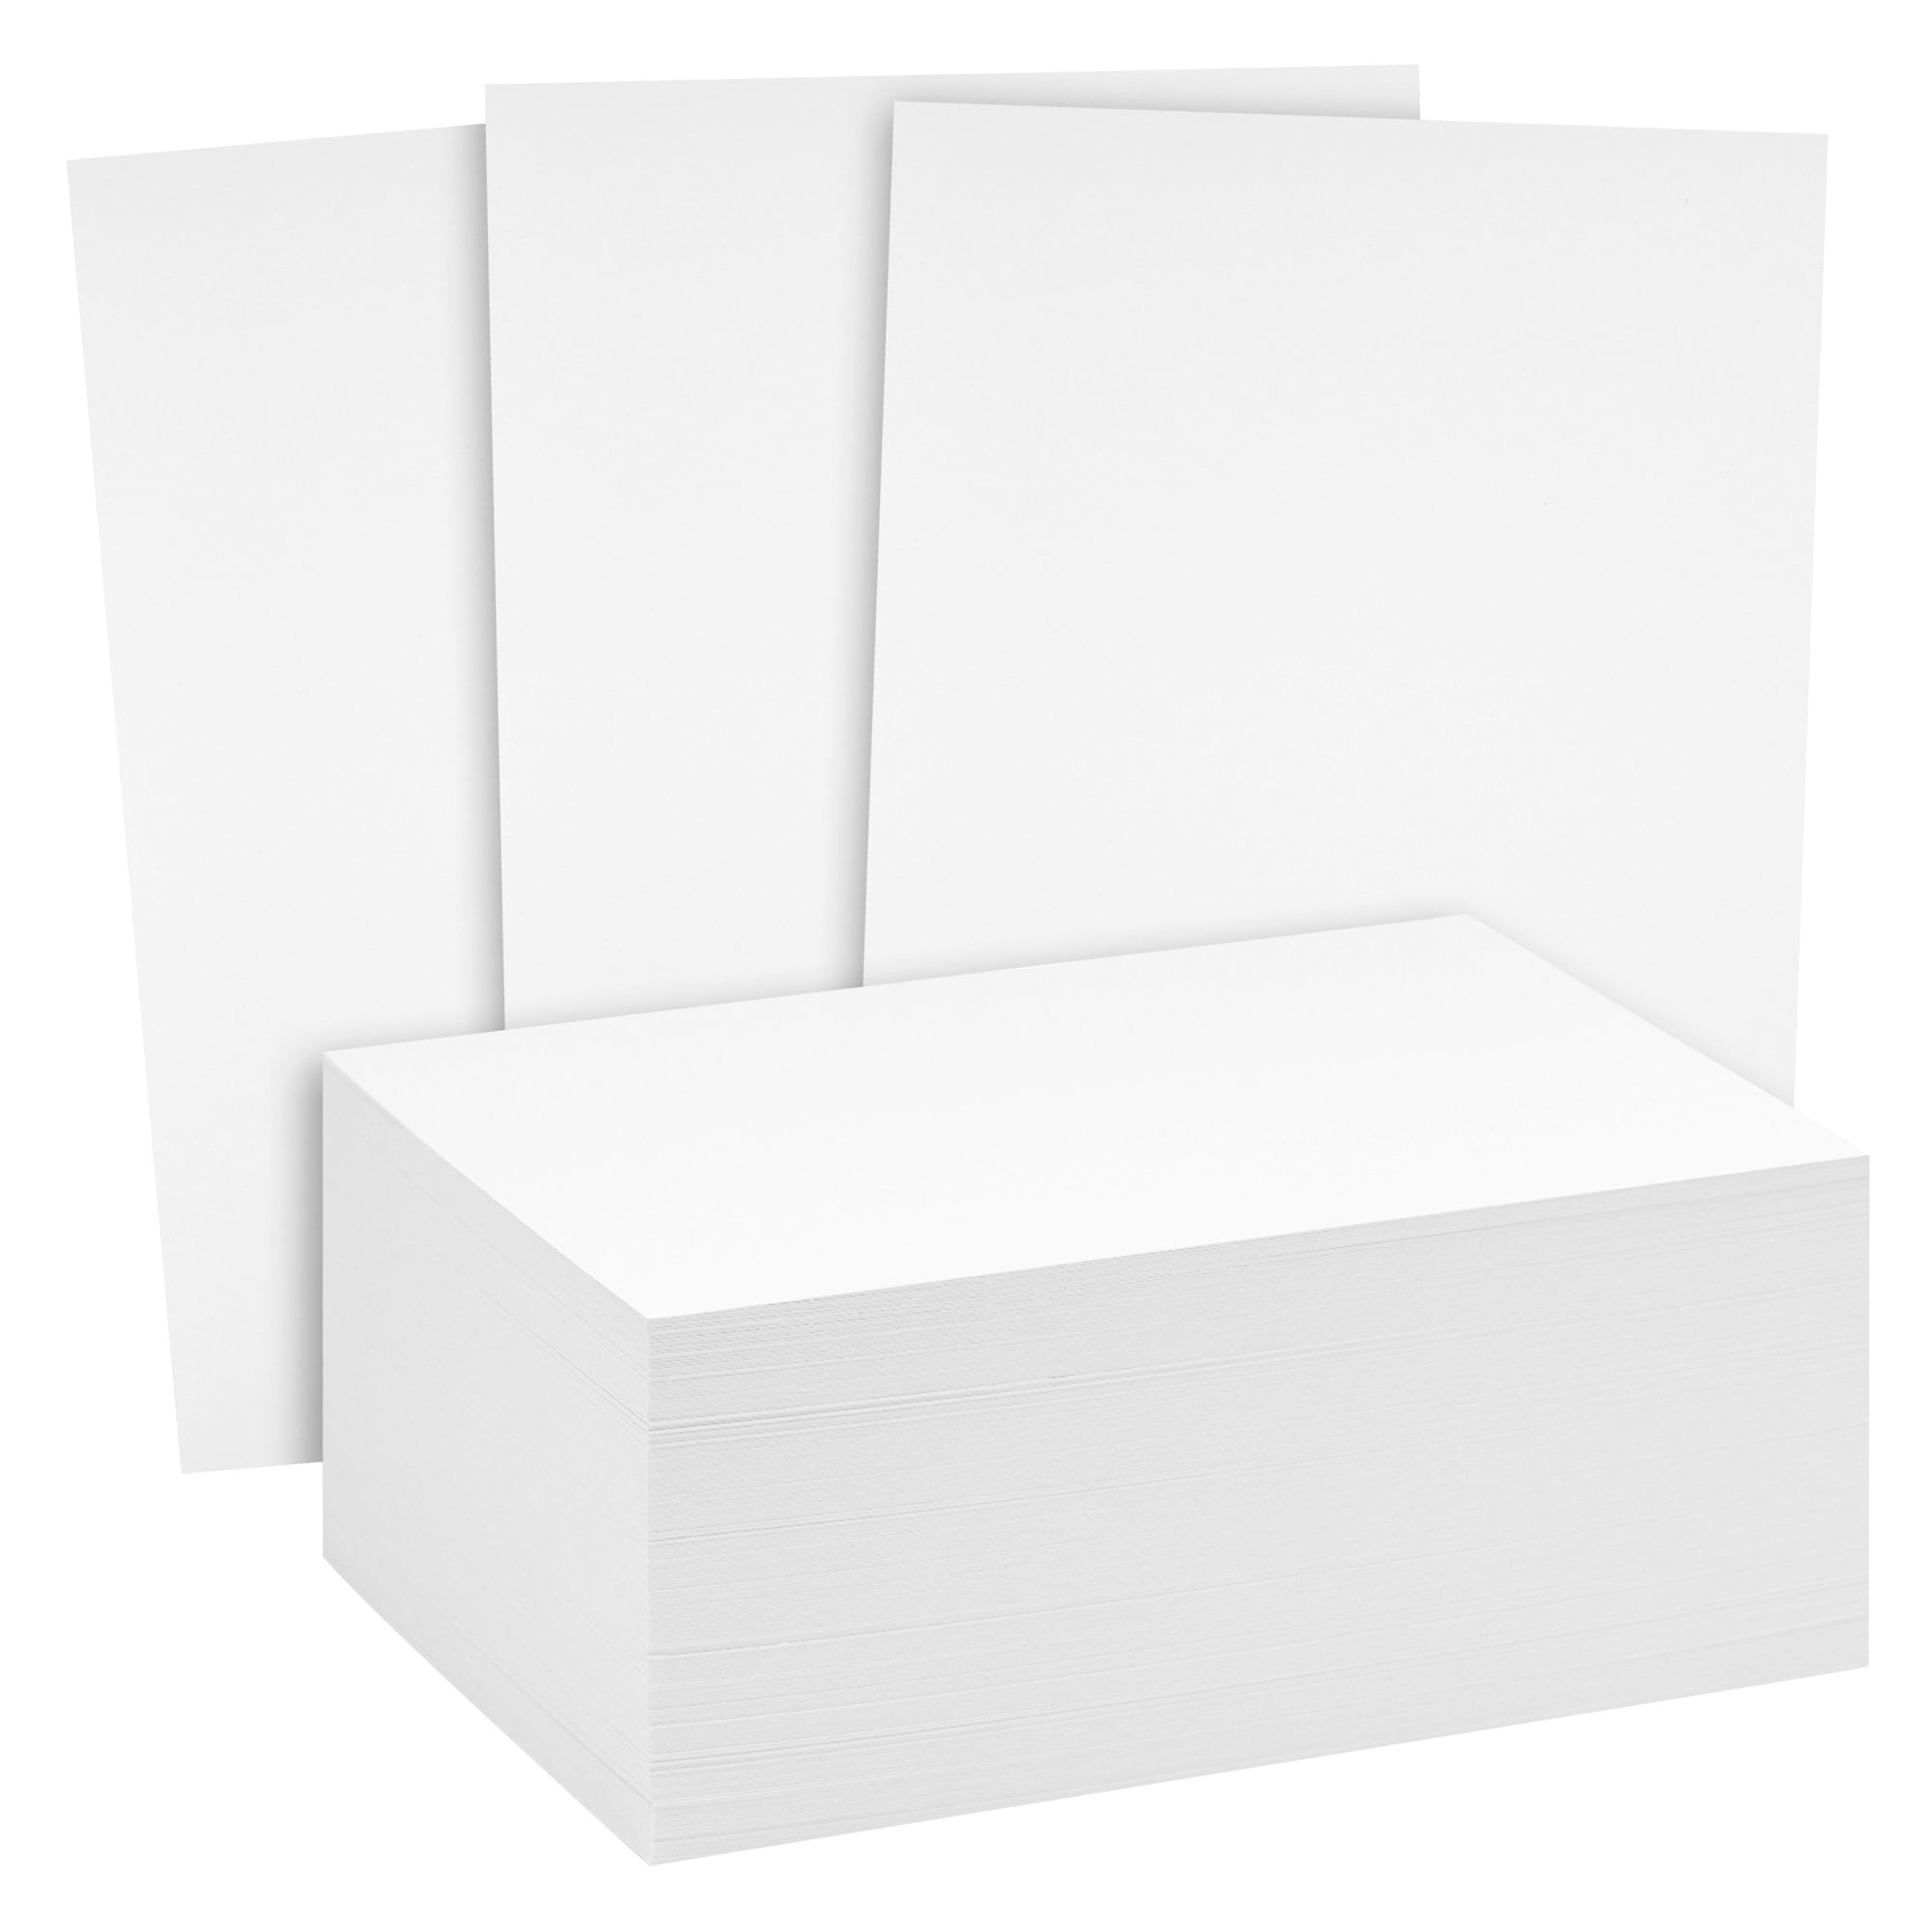 200 Sheets 5x7 110 lb/300 GSM Cover Thick Cardstock - Blank